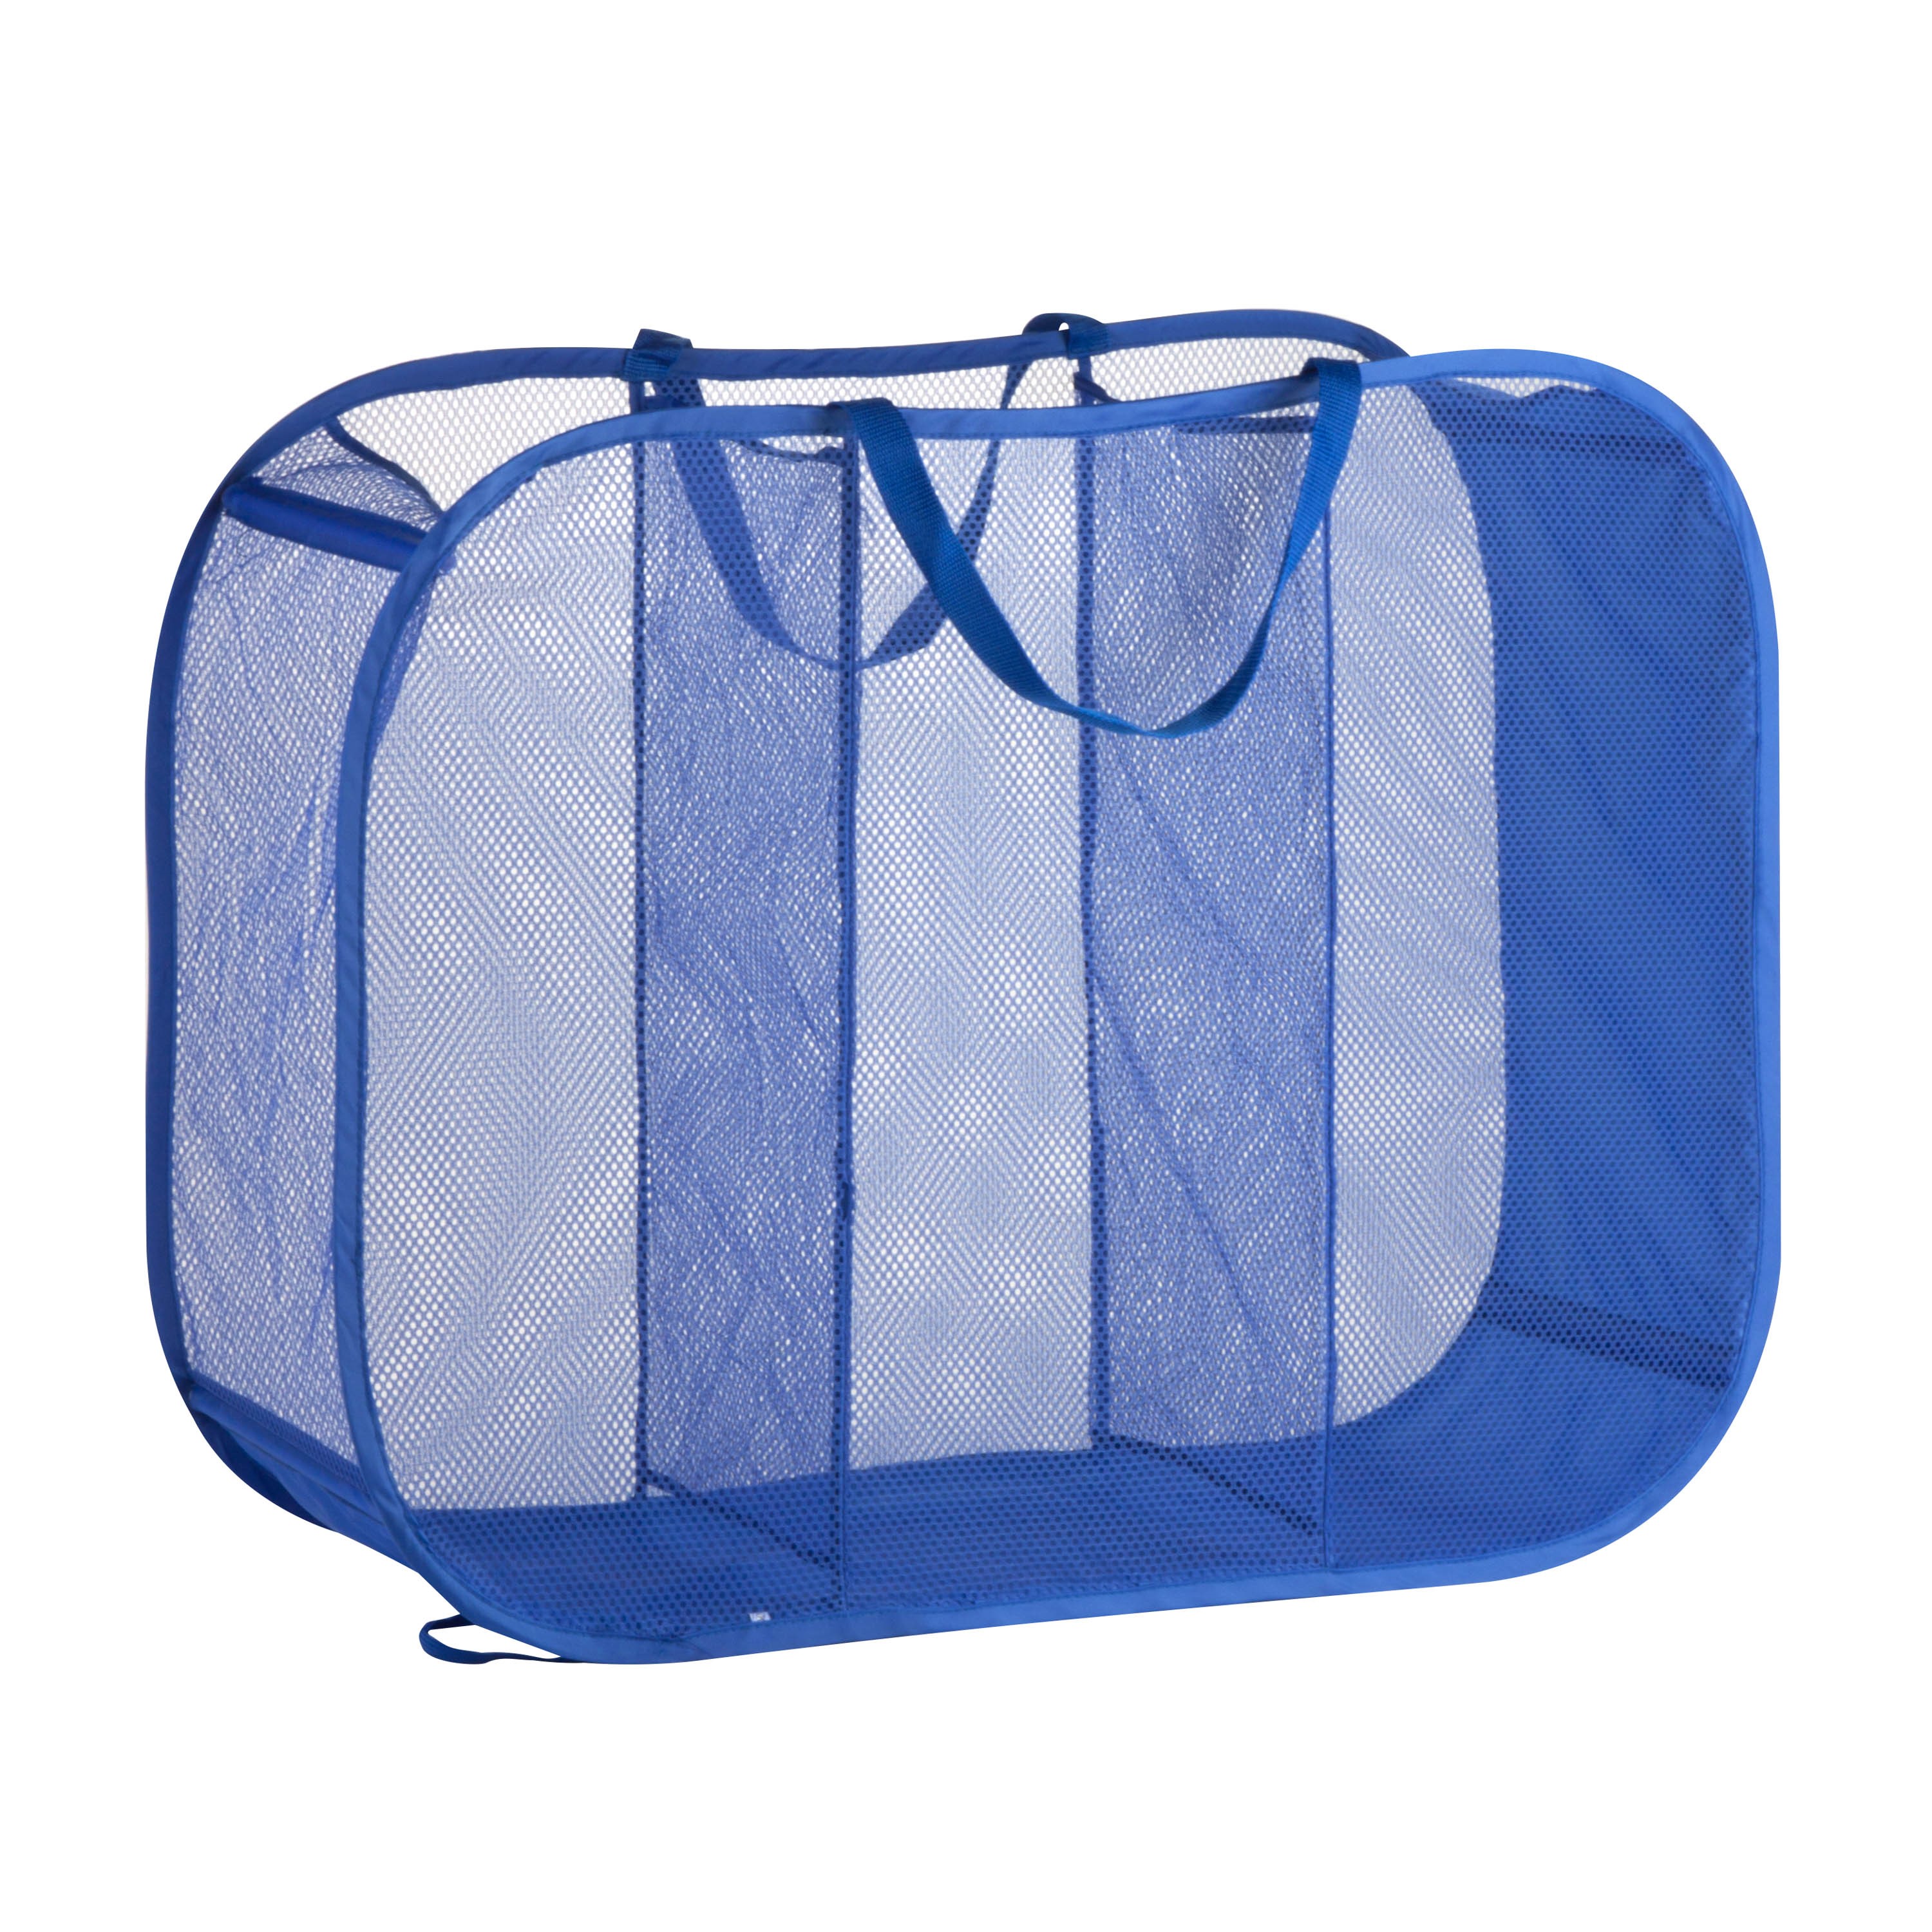 Honey Can Do Mesh Triple Laundry Sorter Basket with Handles, Blue - image 2 of 2